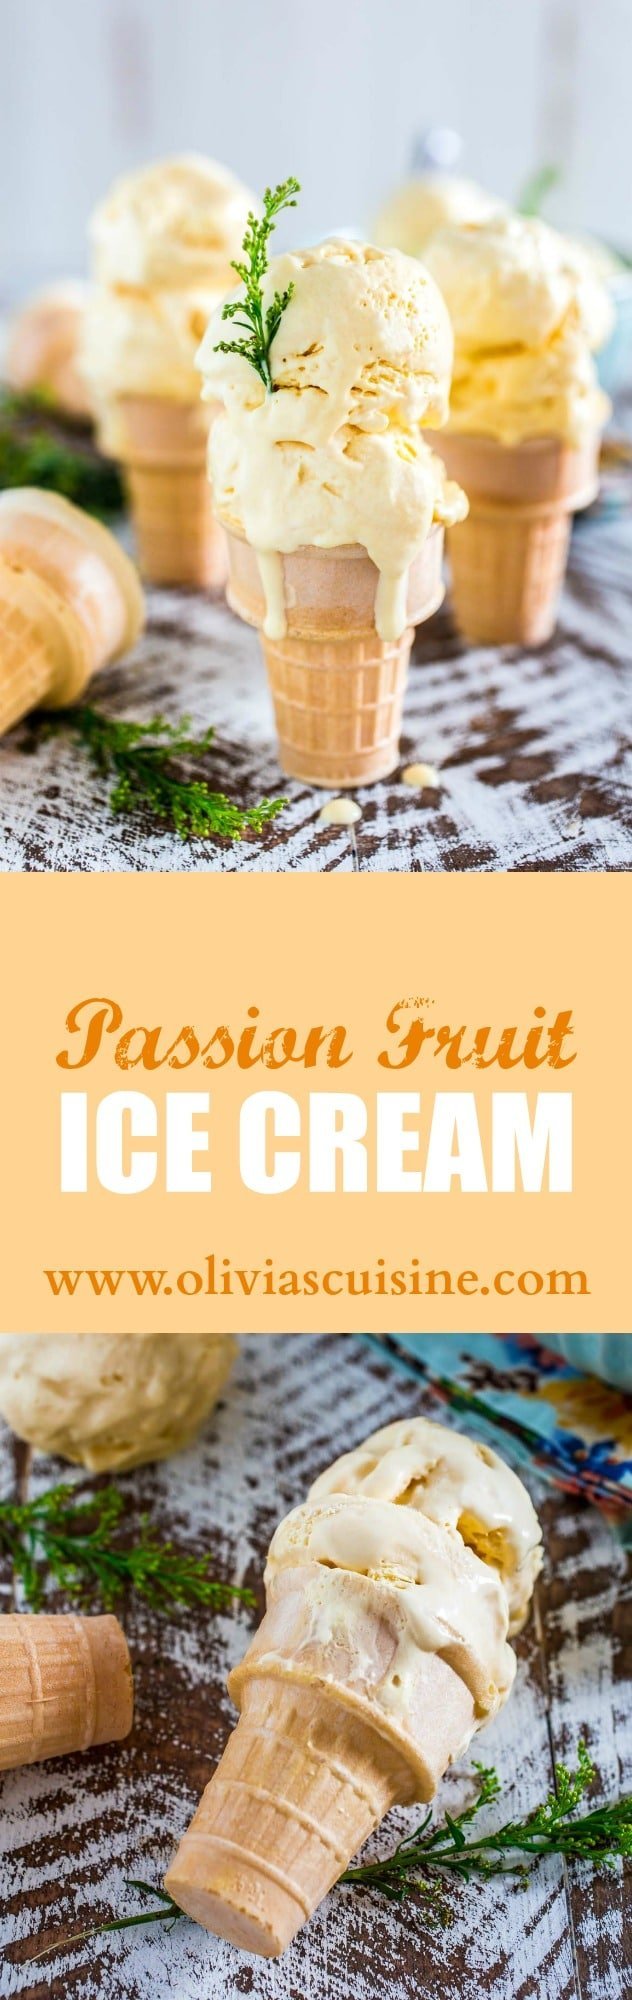 Passion Fruit Ice Cream | www.oliviascuisine.com | A no-churn ice cream recipe that is sweet, tart, creamy and oh so tropical! :) The perfect frozen treat for a hot summer day!